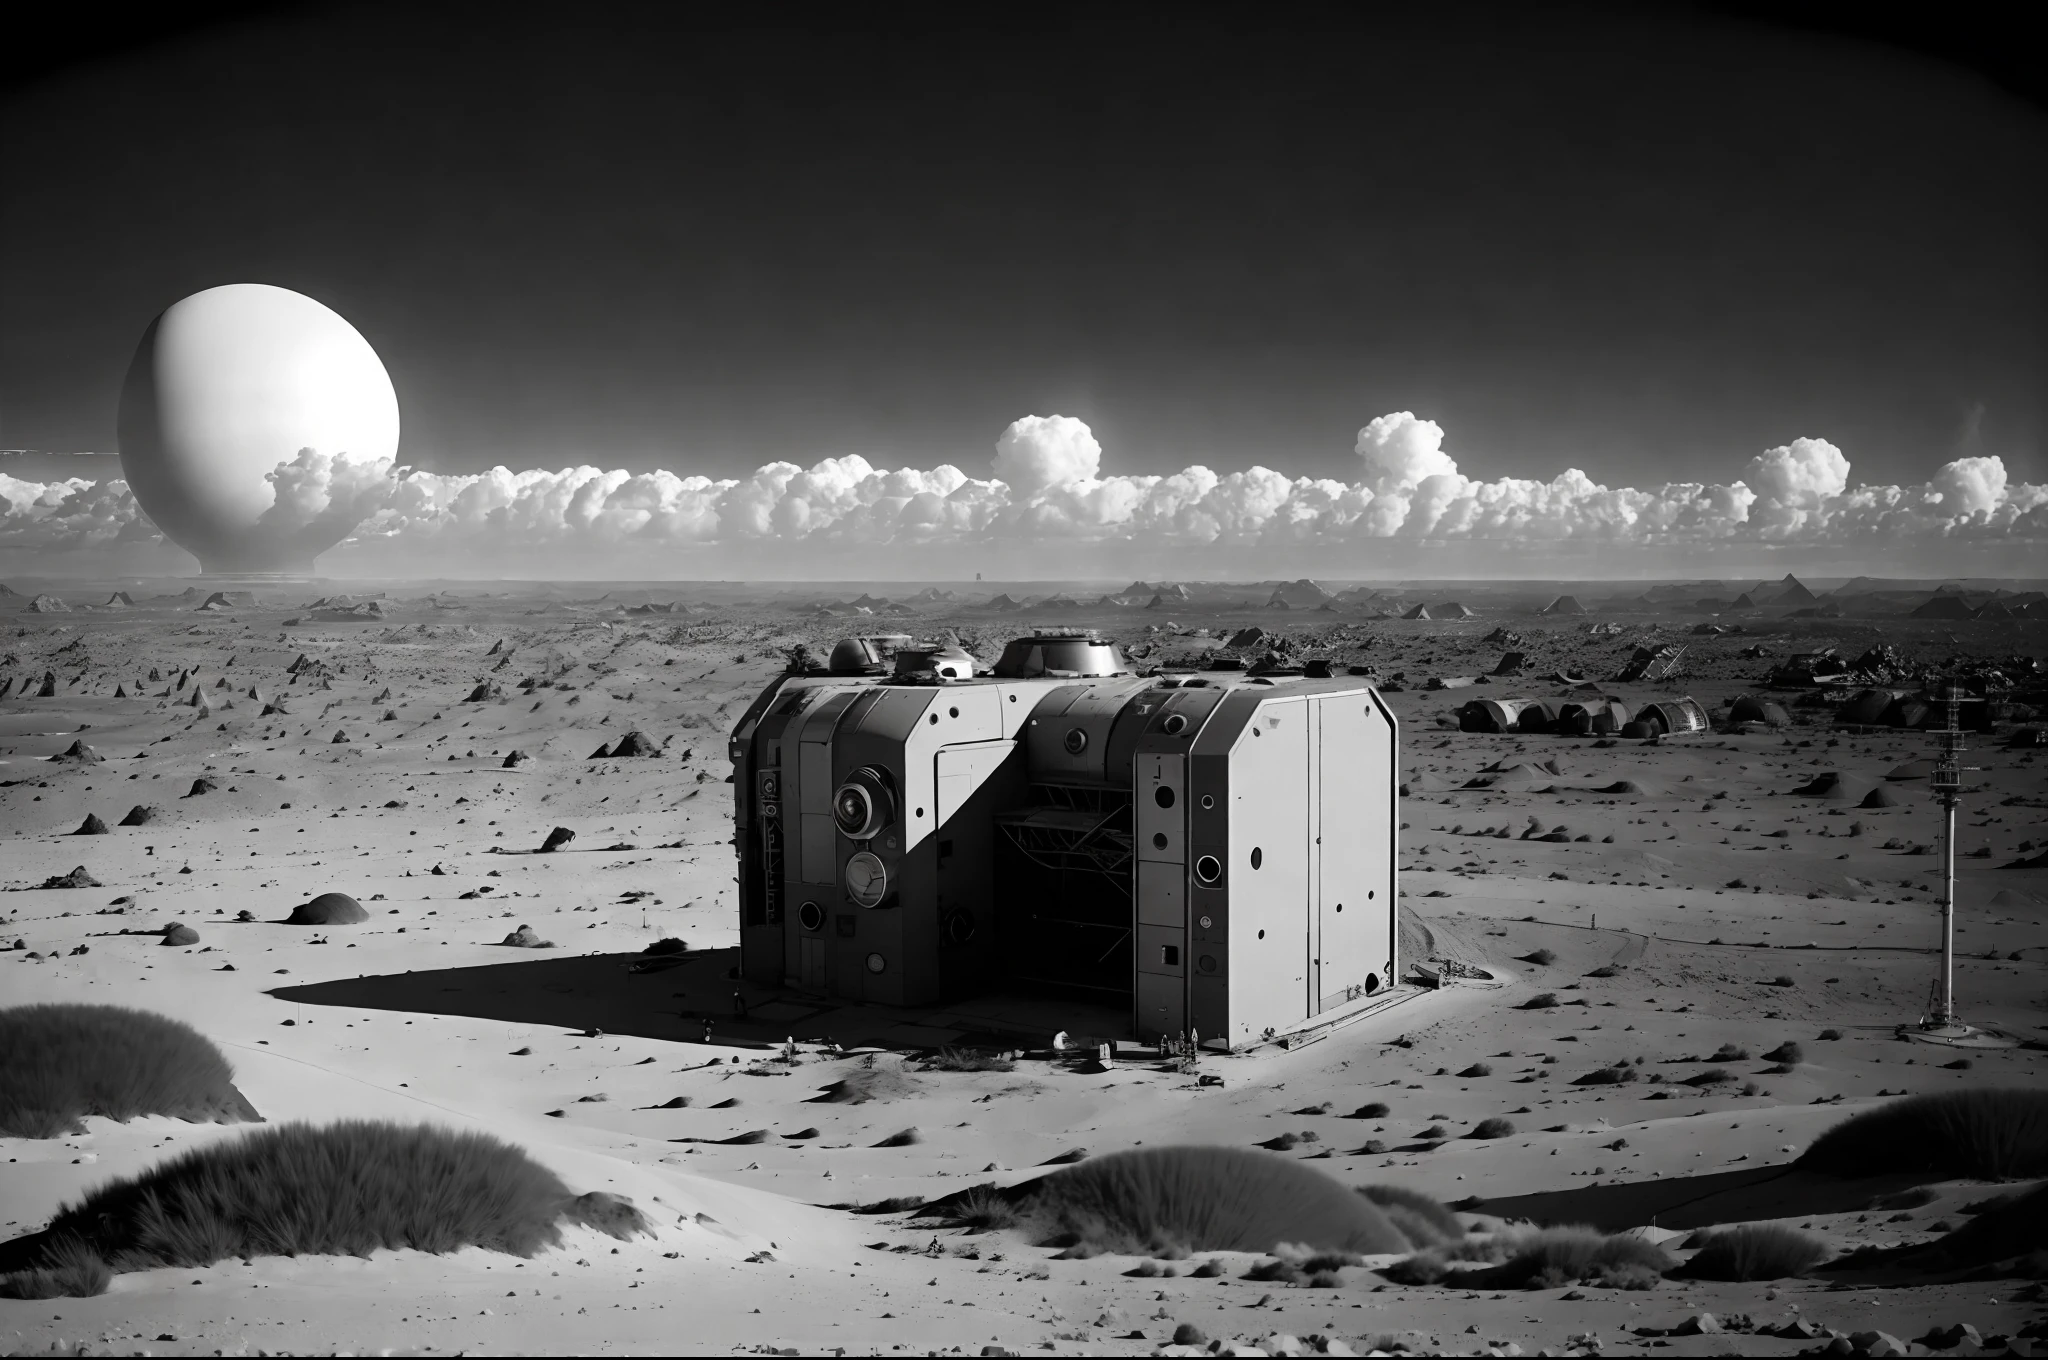 The camera is positioned in space, looking down on a dying Earth. The shot is captured using a high-resolution digital camera with a wide-angle lens, emphasizing the vastness and emptiness of space. The shot is treated with a gritty, high-contrast film look that adds to the stark and bleak atmosphere. The overall effect is inspired by the post-apocalyptic style of sci-fi artist Simon Stlenhag and documentary photographer Sebastio Salgado